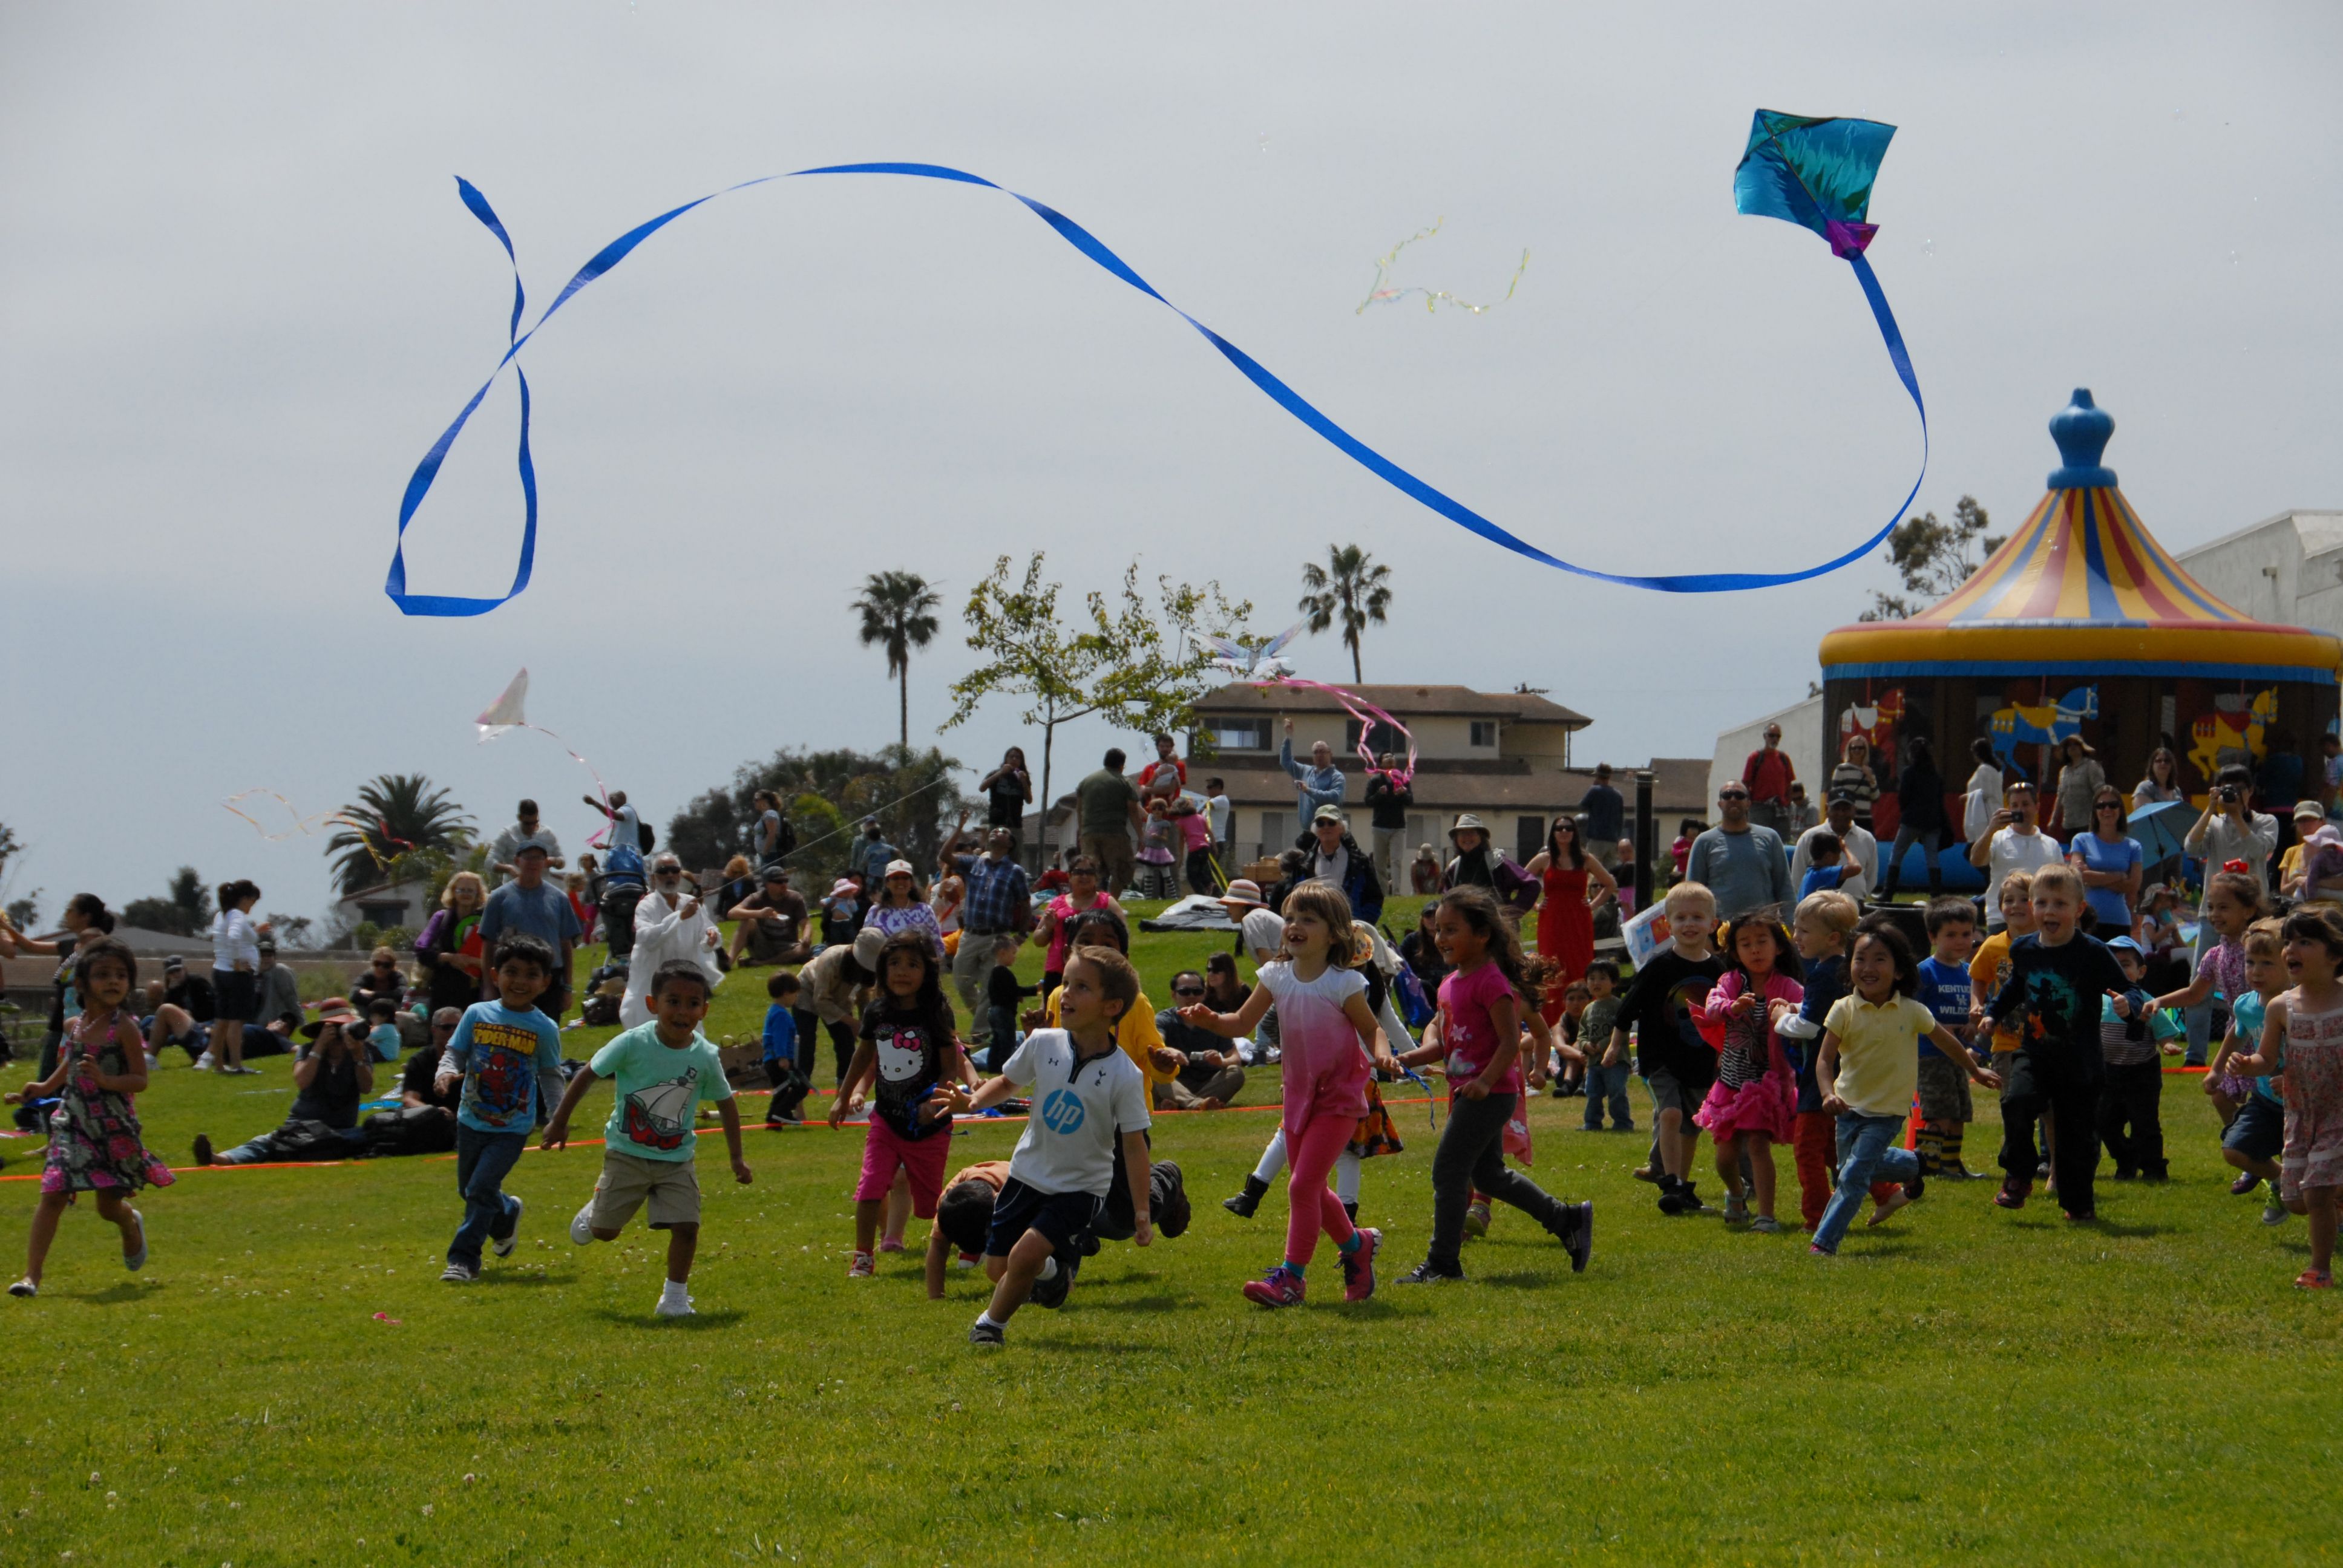 Children running on a large green lawn, chasing the tail of a kite